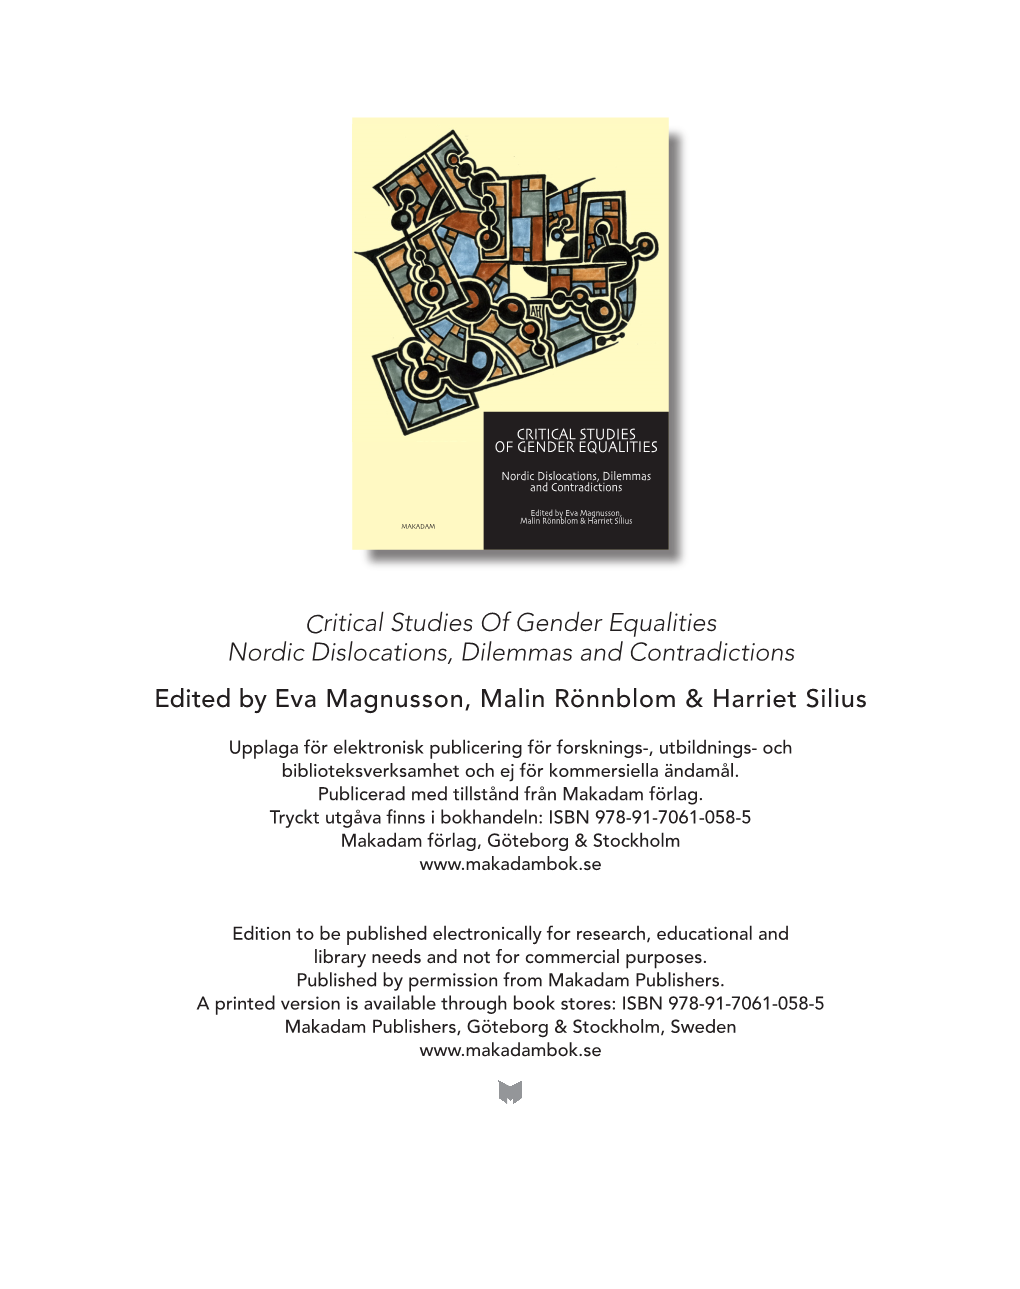 Critical Studies of Gender Equalities Nordic Dislocations, Dilemmas and Contradictions Edited by Eva Magnusson, Malin Rönnblom & Harriet Silius